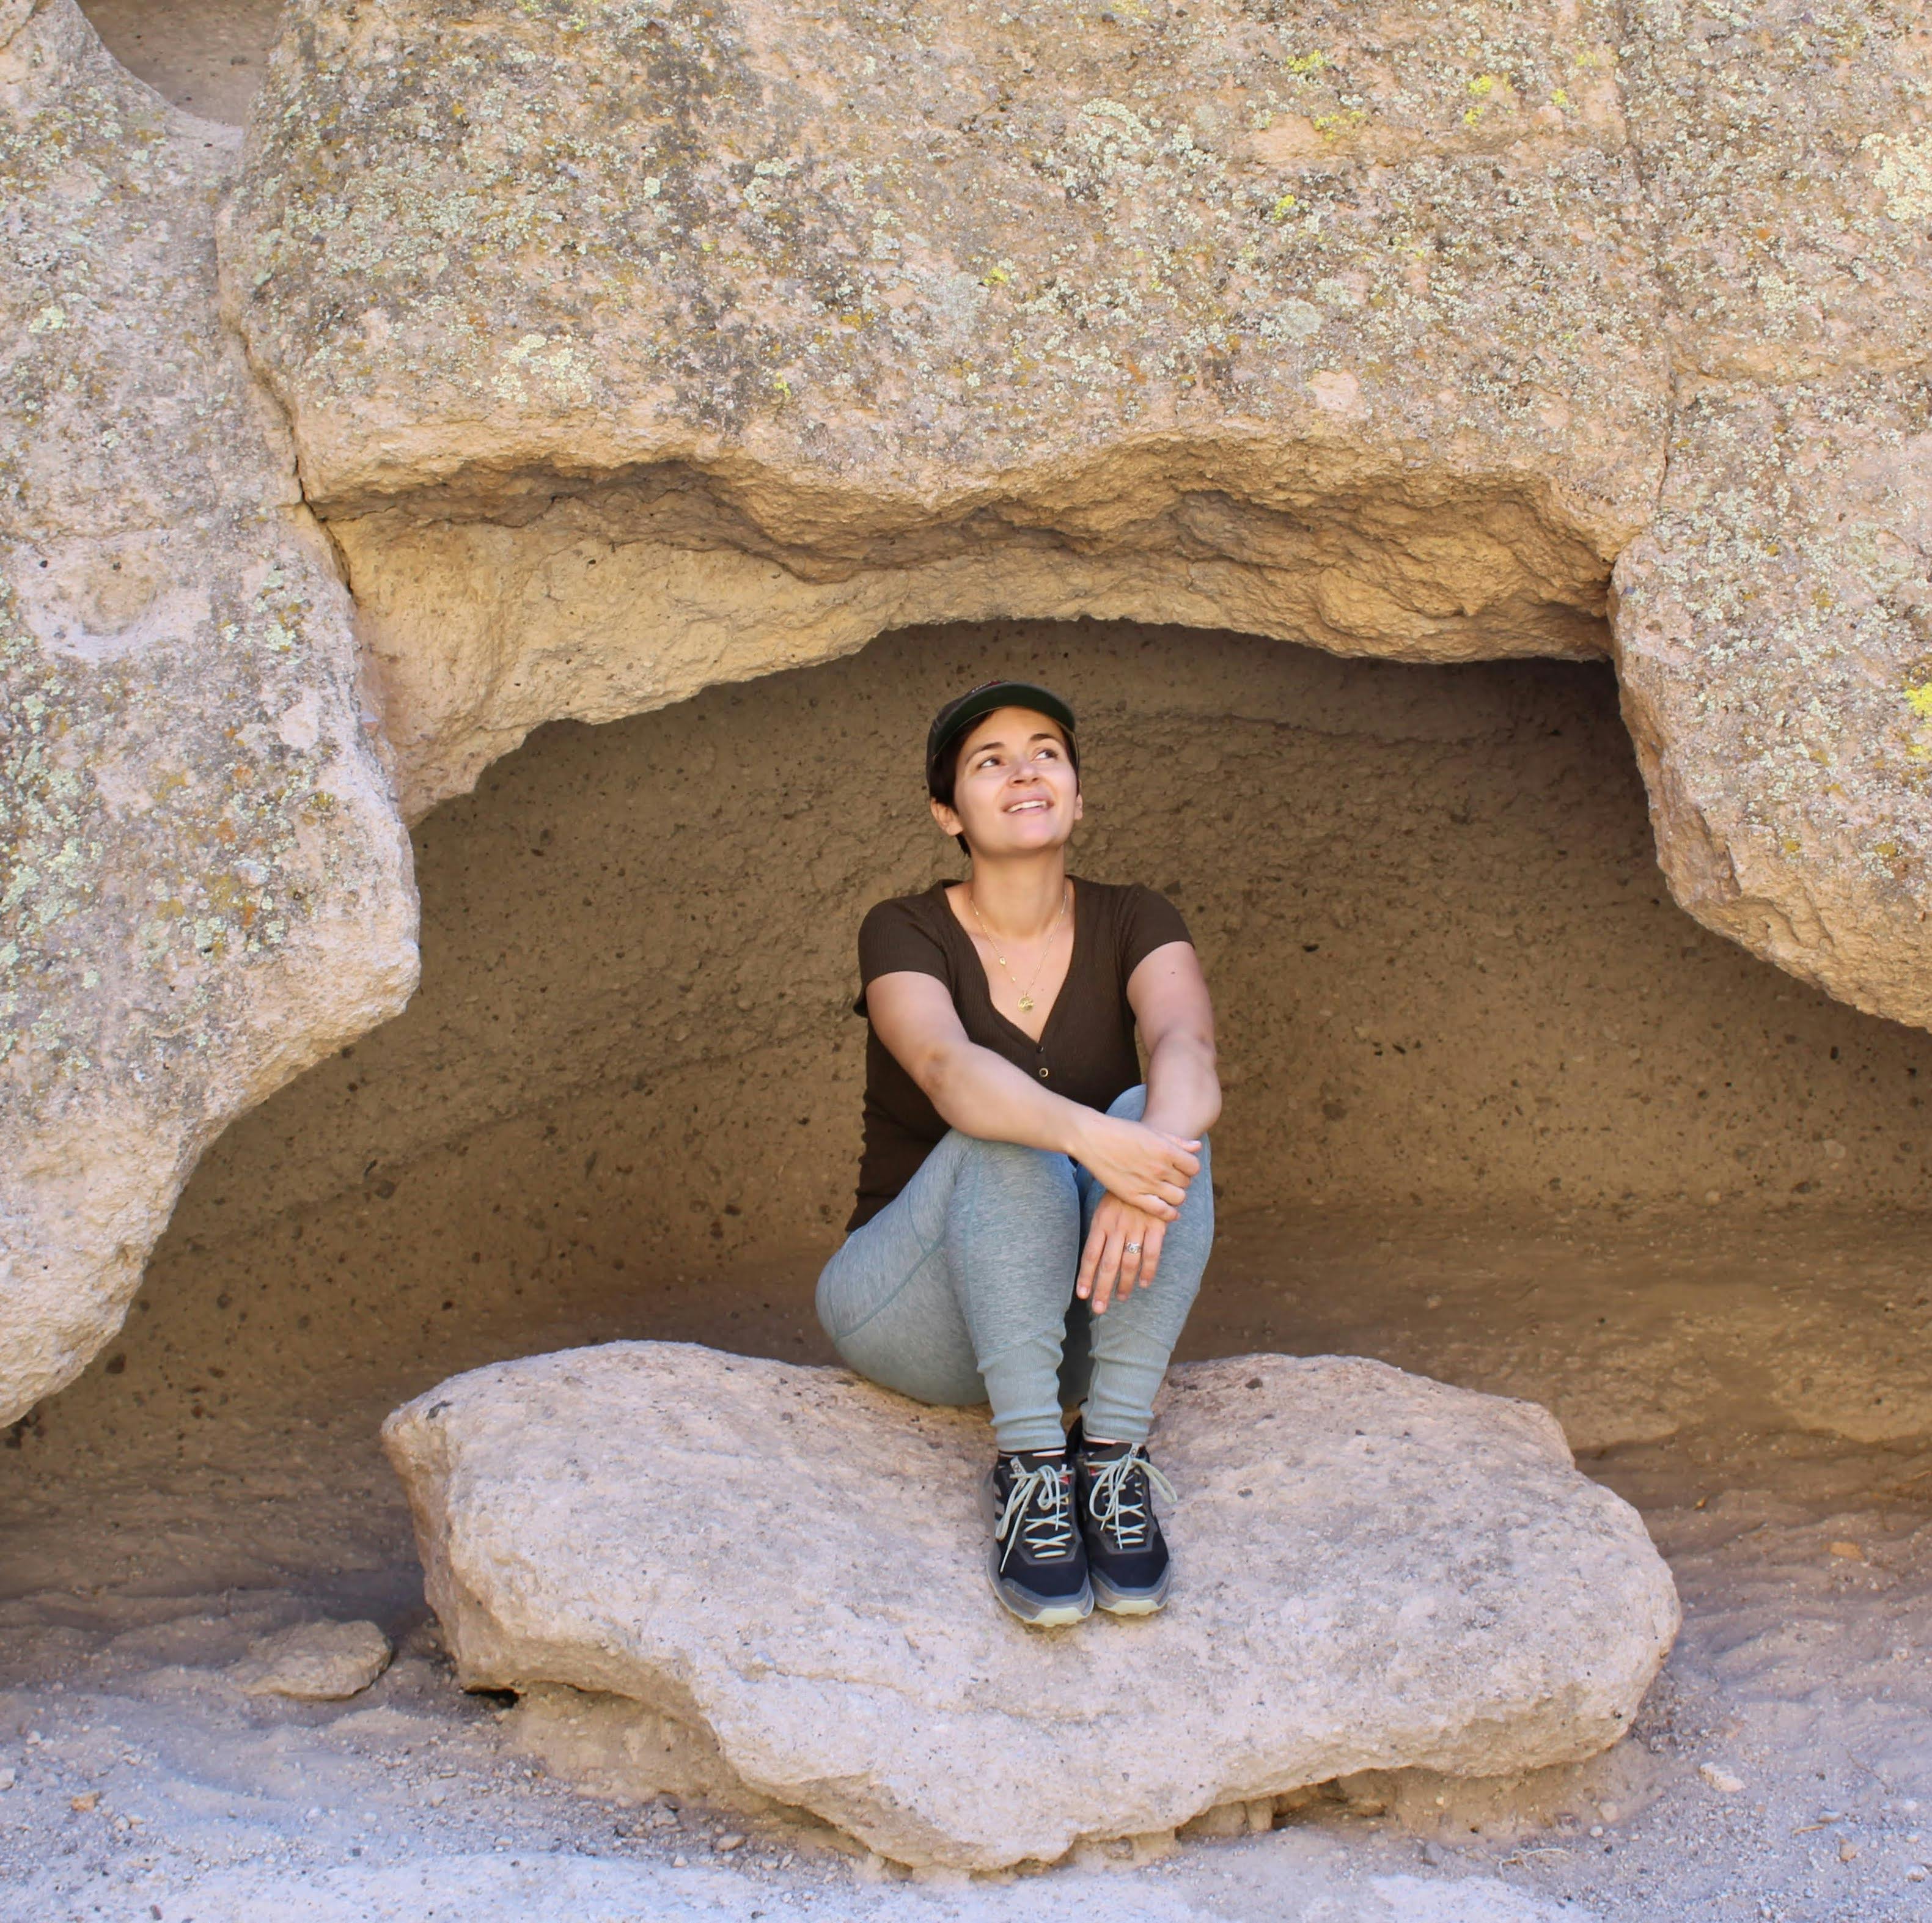 Hiker sitting on a large rock under a cavern in Hole in the Wall Rings Trail Mojave Desert 